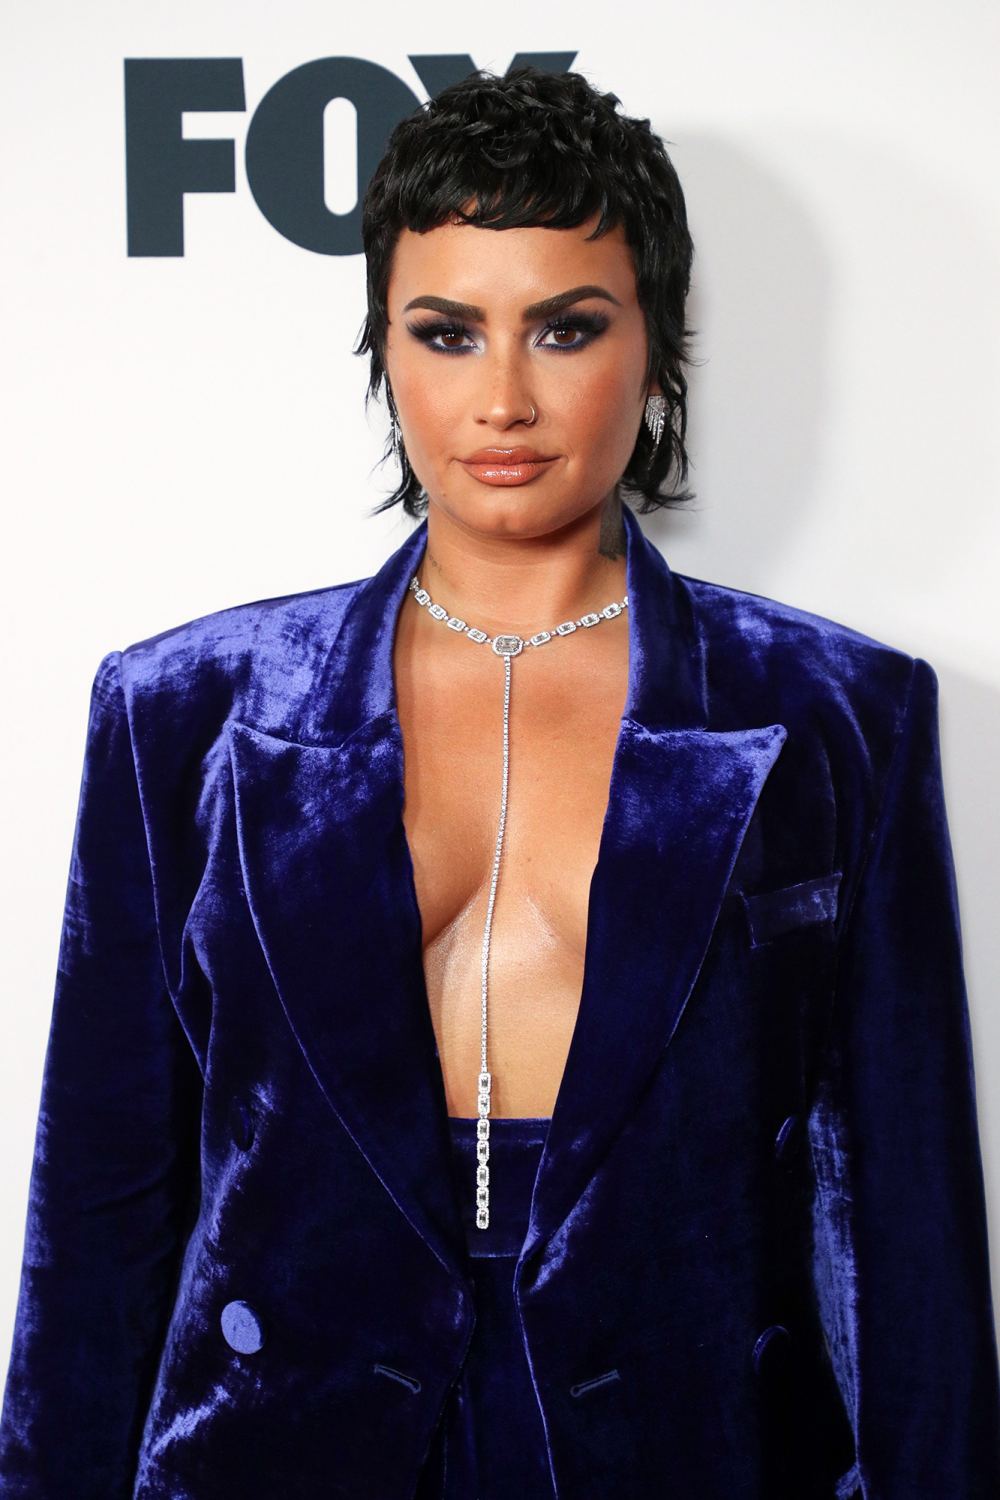 https://www.usmagazine.com/wp-content/uploads/2022/01/Demi-Lovato-Returns-Home-After-Secretly-Completing-Another-Rehab-Stay-3-Years-After-Overdose.jpg?w=1000&quality=78&strip=all